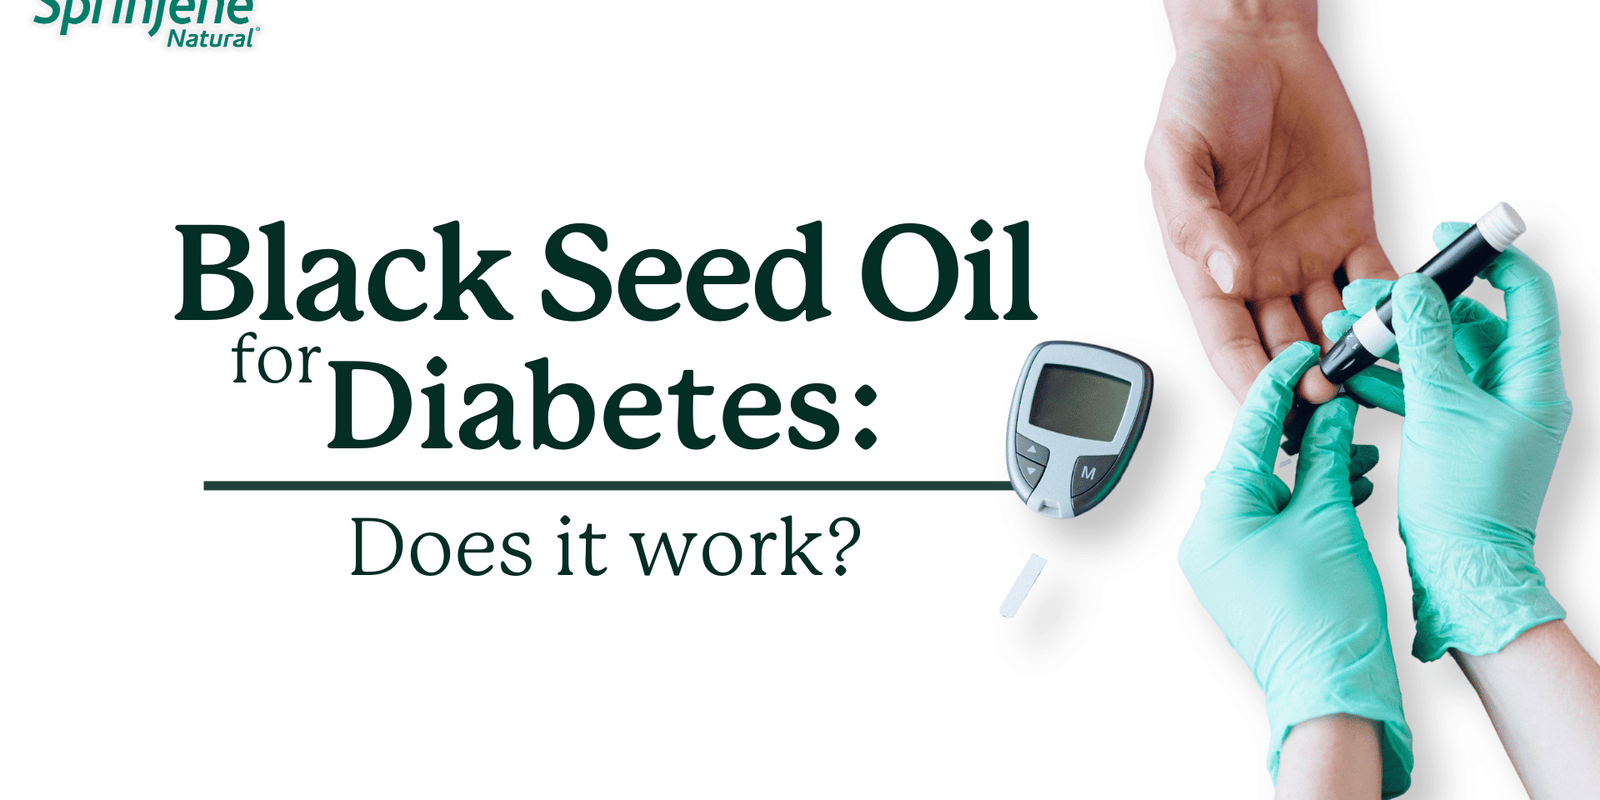 Black Seed Oil for Diabetes: Does It Work?